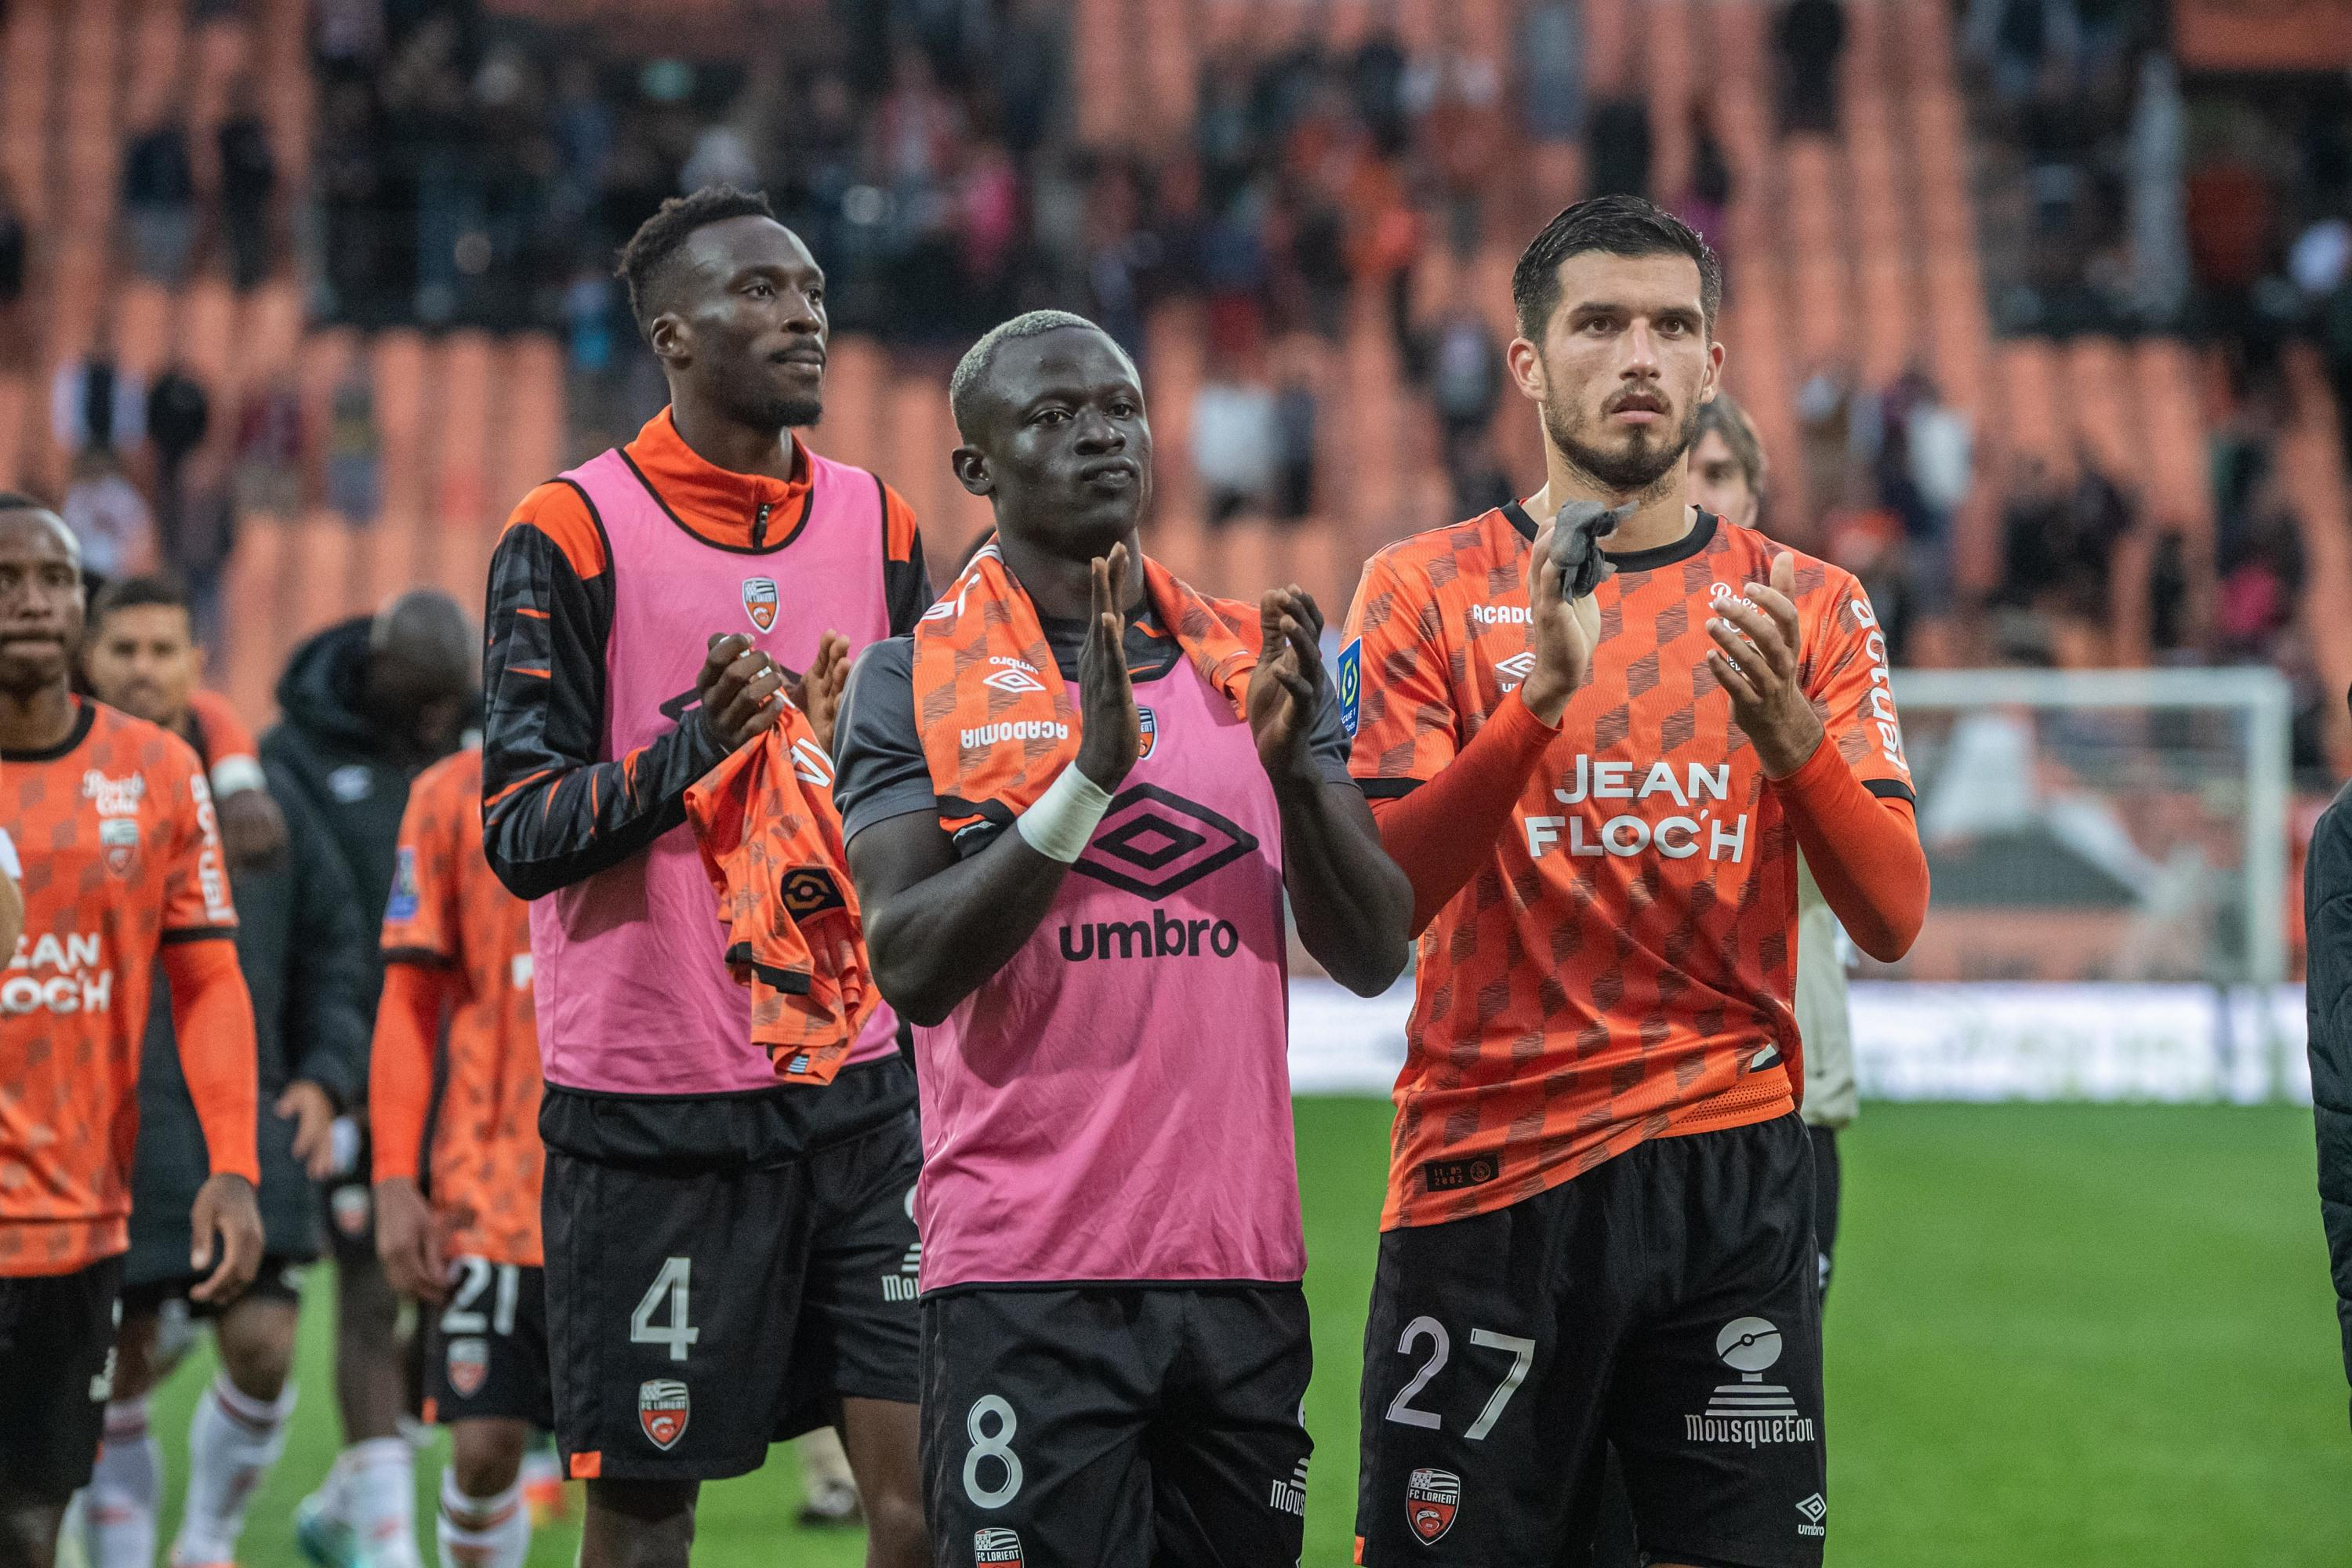 Mercato: Adrian Grbic leaves Lorient (official)